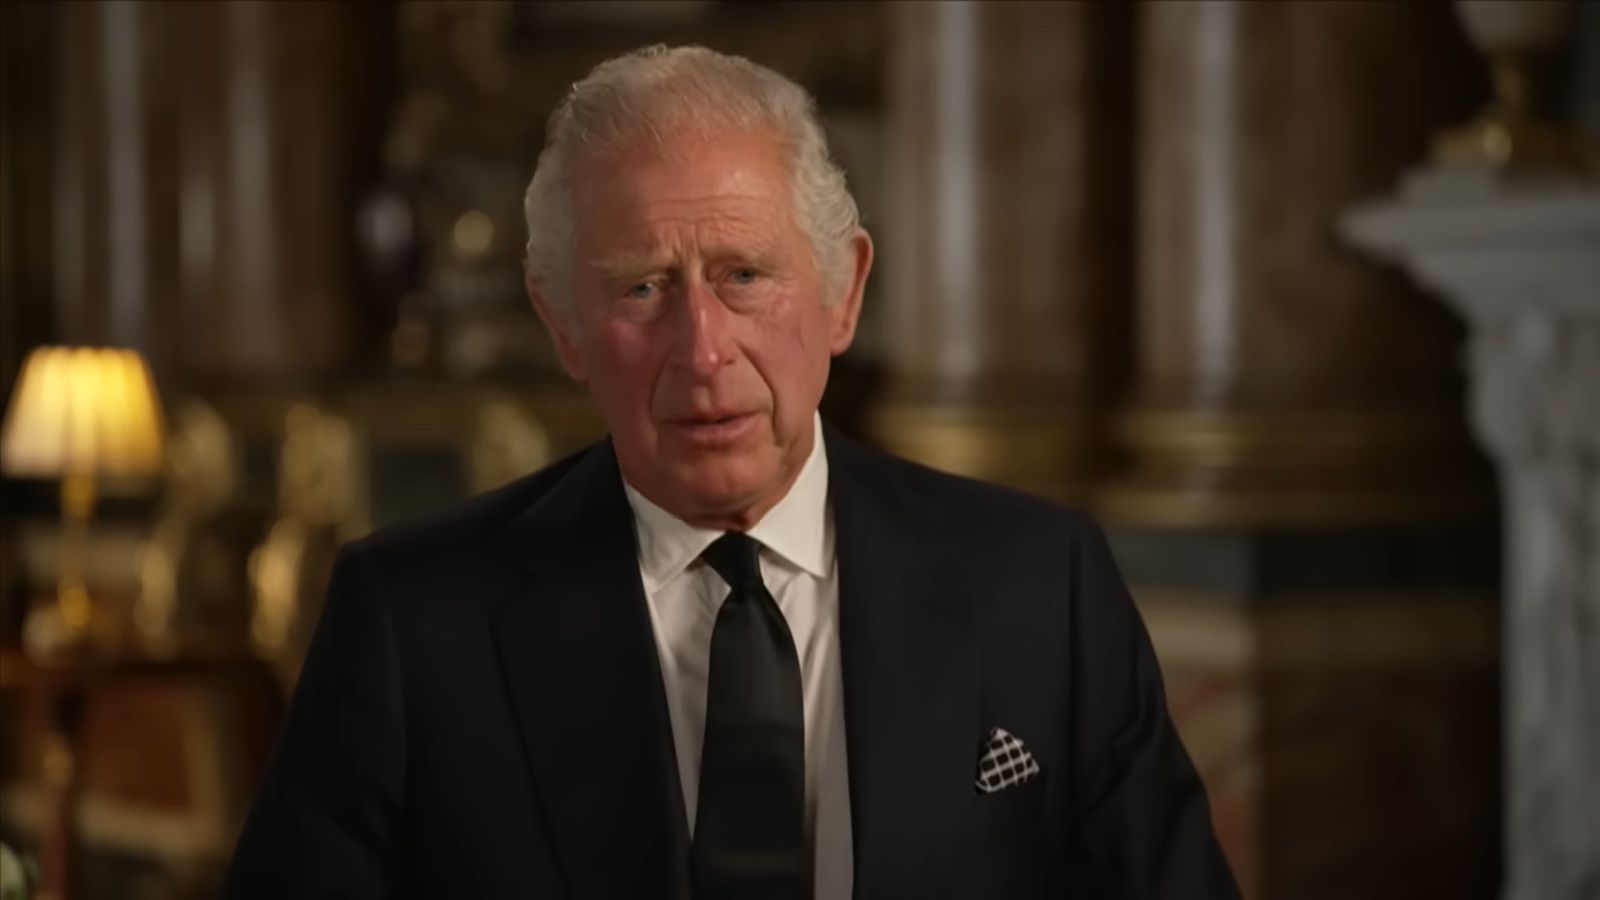 king-charles-iii-will-unveil-archie-lilibets-royal-titles-after-the-mourning-period-for-queen-elizabeth-passing-monarchs-decision-could-influence-prince-harry-meghan-markle-security-demands